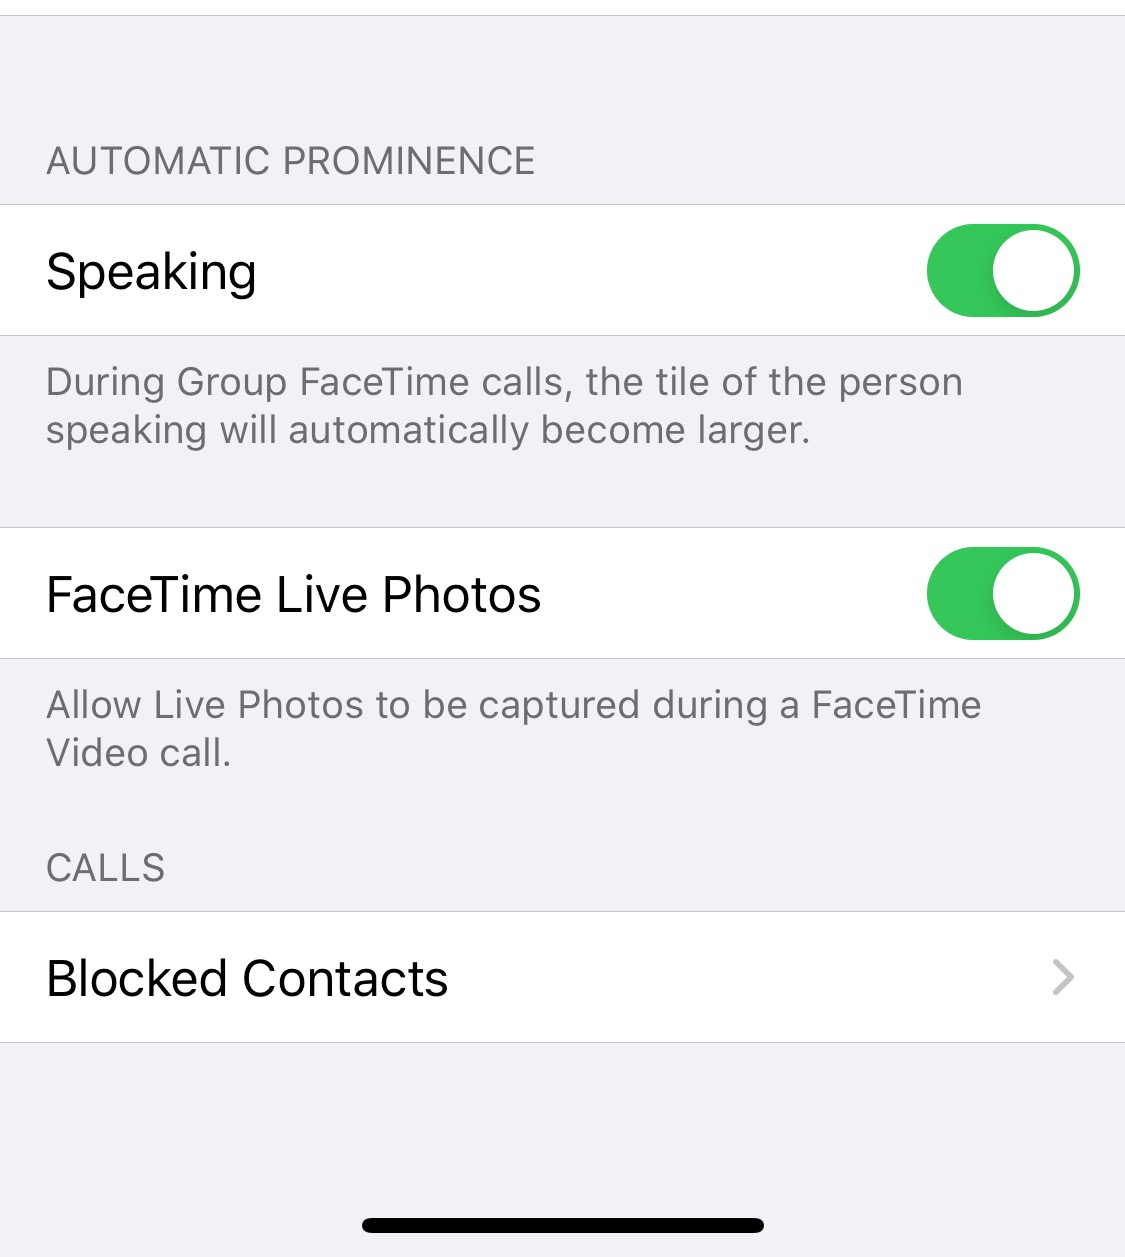 iOS 13.5 Beta 3 Introduces Toggle to Disable Automatic Prominence in Group FaceTime Calls